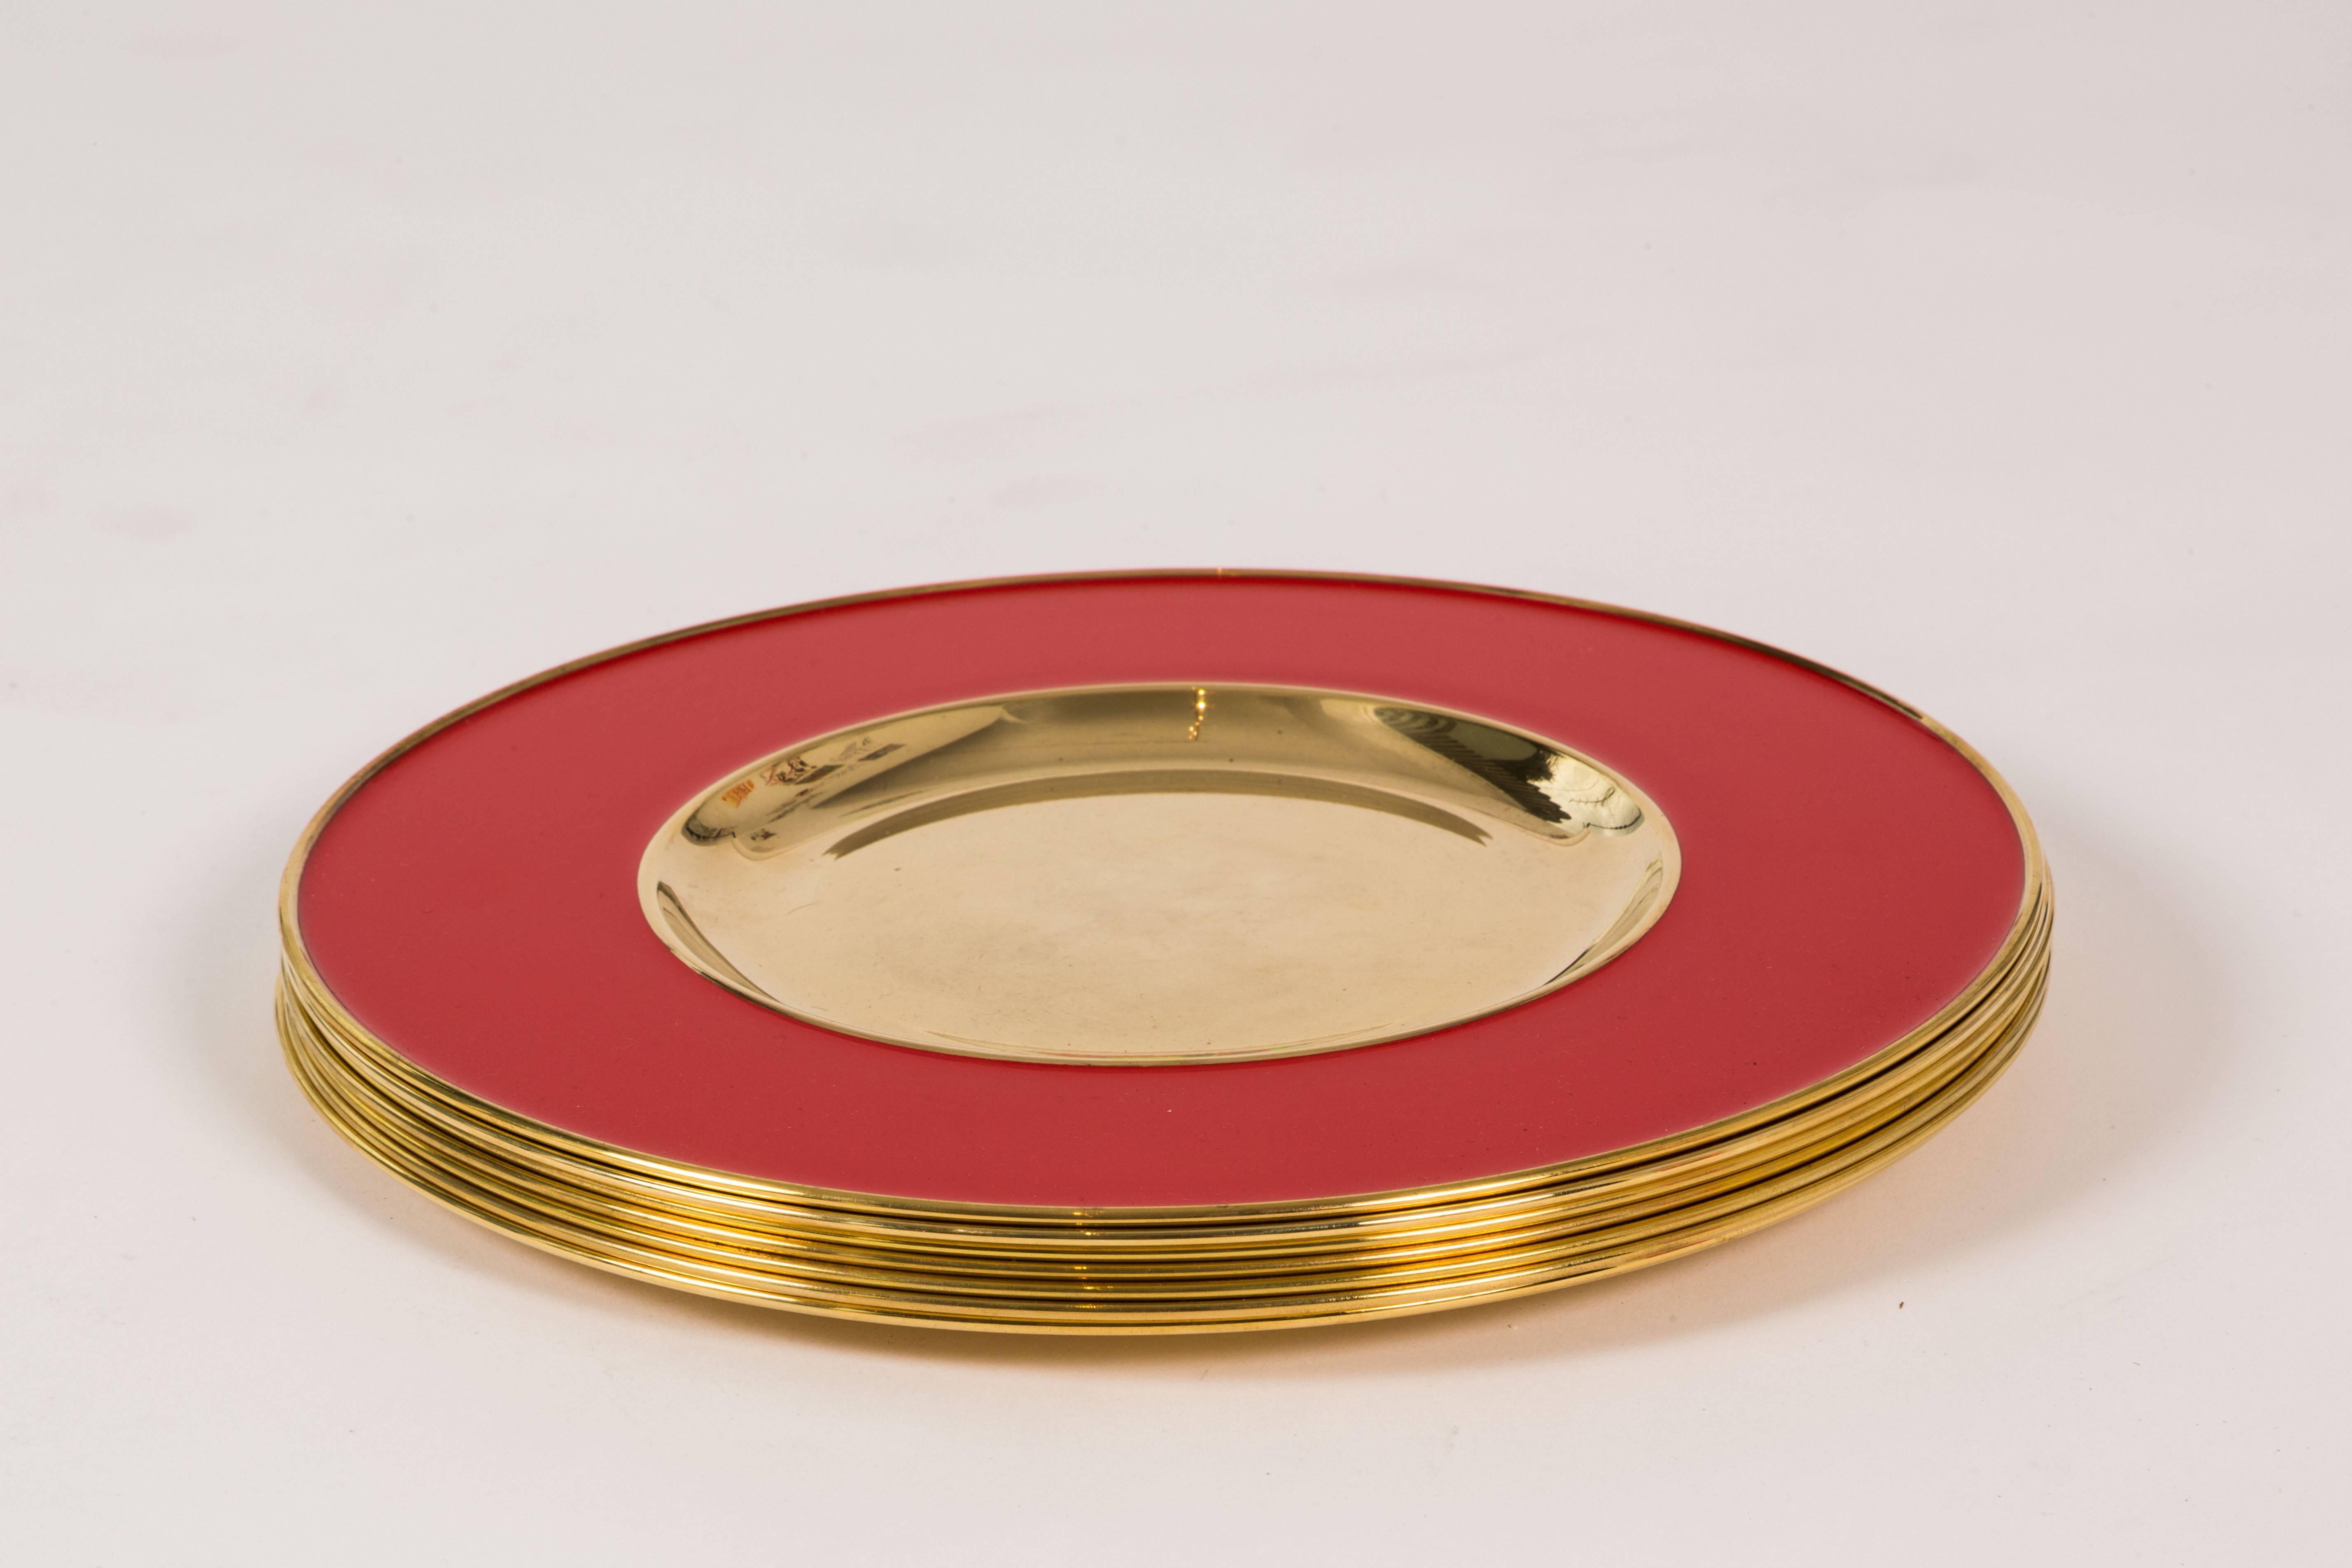 20th Century Chic Chargers in Brilliant Red and Brass by Etro Design